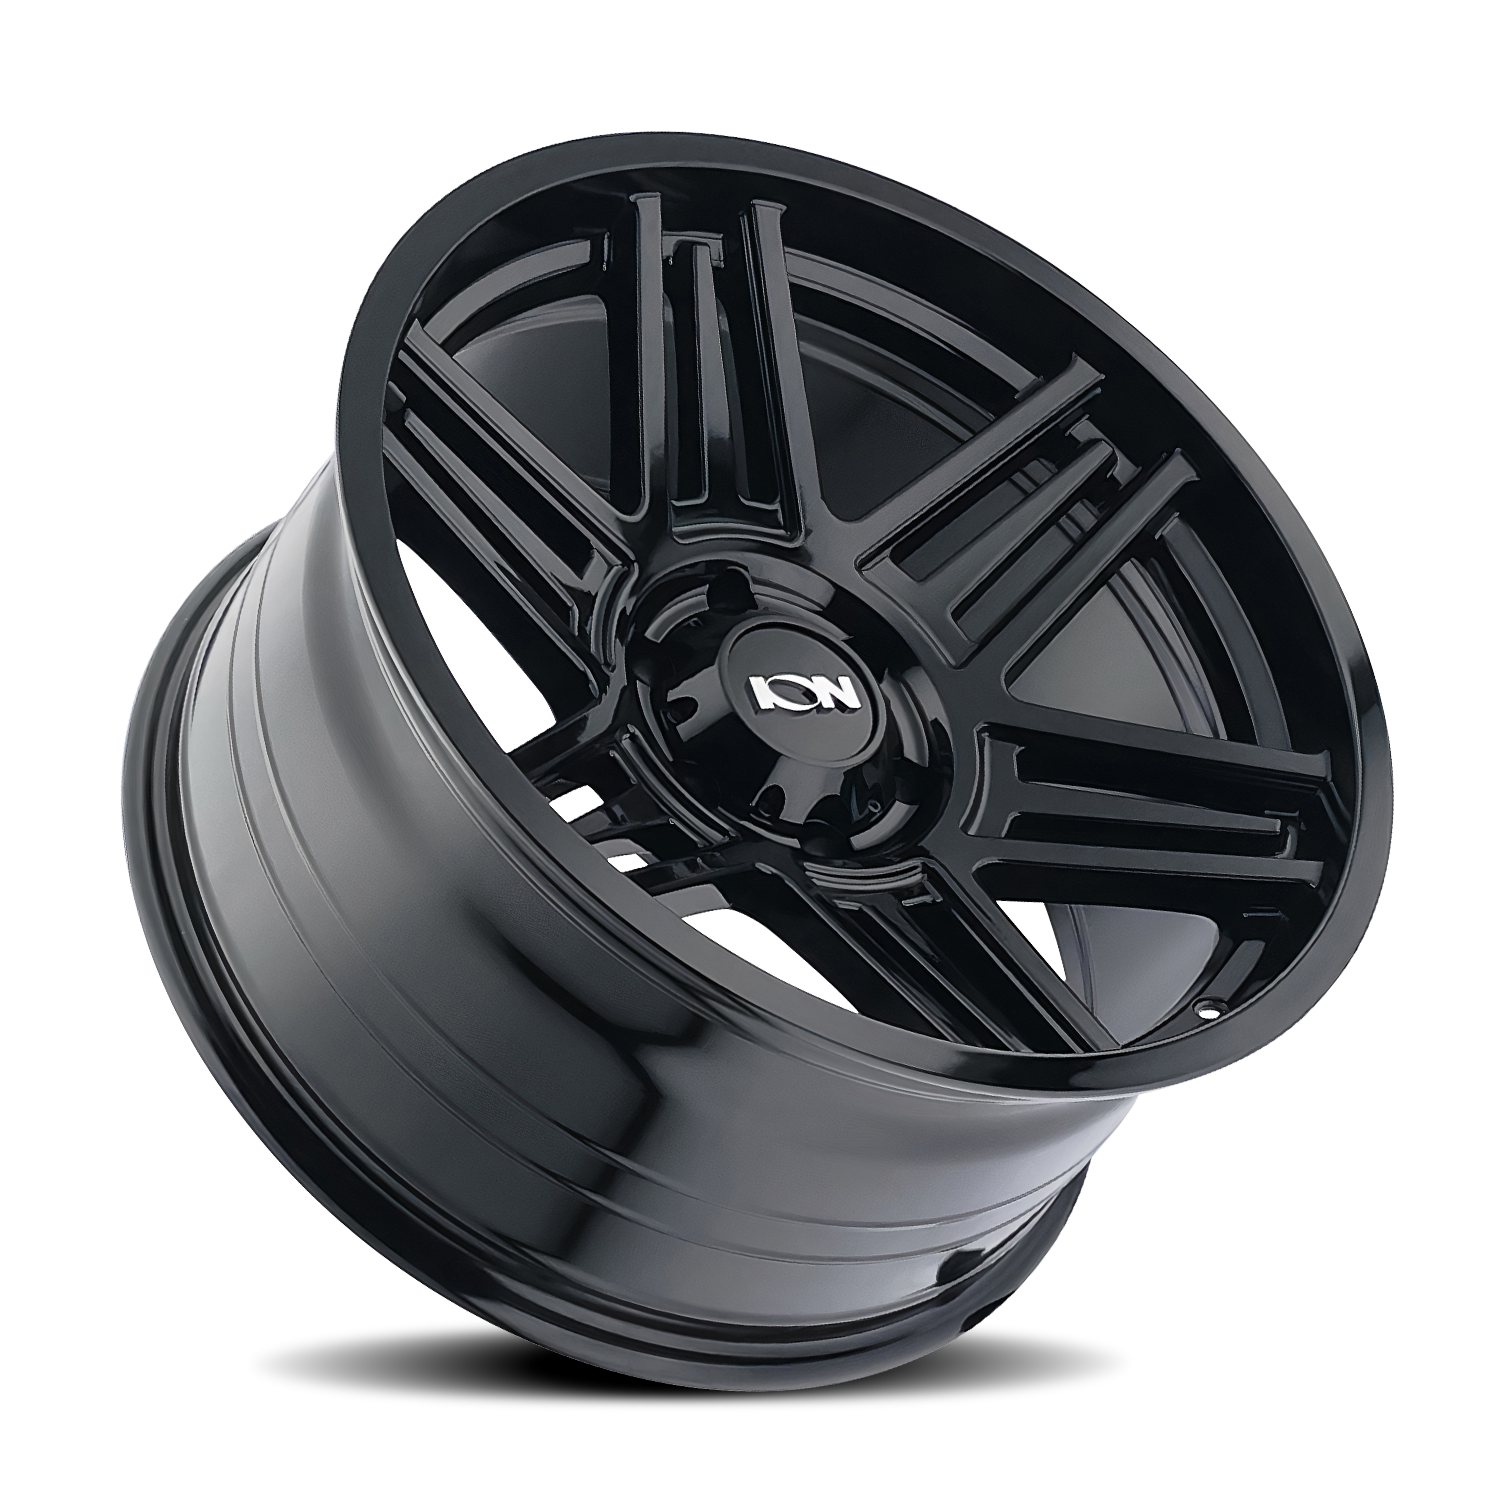 ION TYPE 147 GLOSS BLACK 20X9 6-139.7 0MM 106MM-Offroad Scout